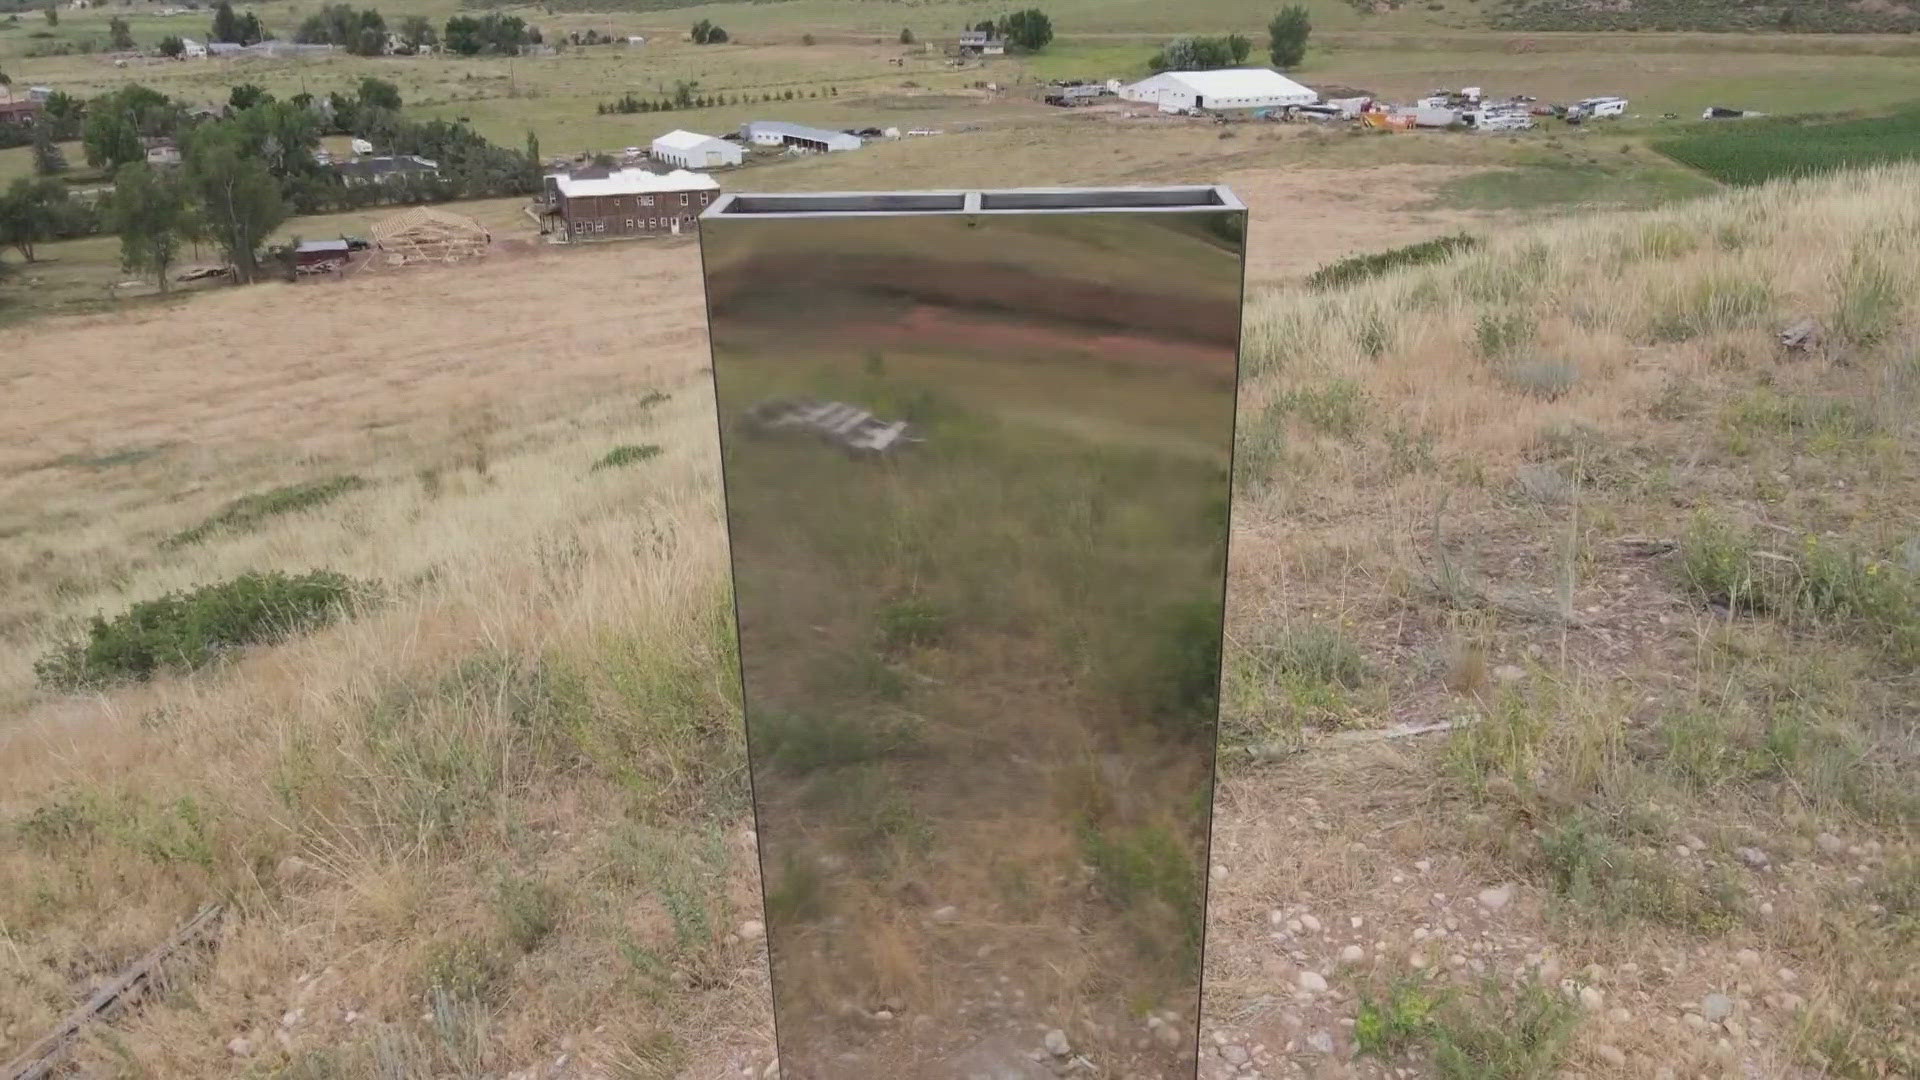 Since 2020, strange objects have appeared in Nevada, Utah and California. Now the mystery has deepened with a shiny monolith in Colorado.